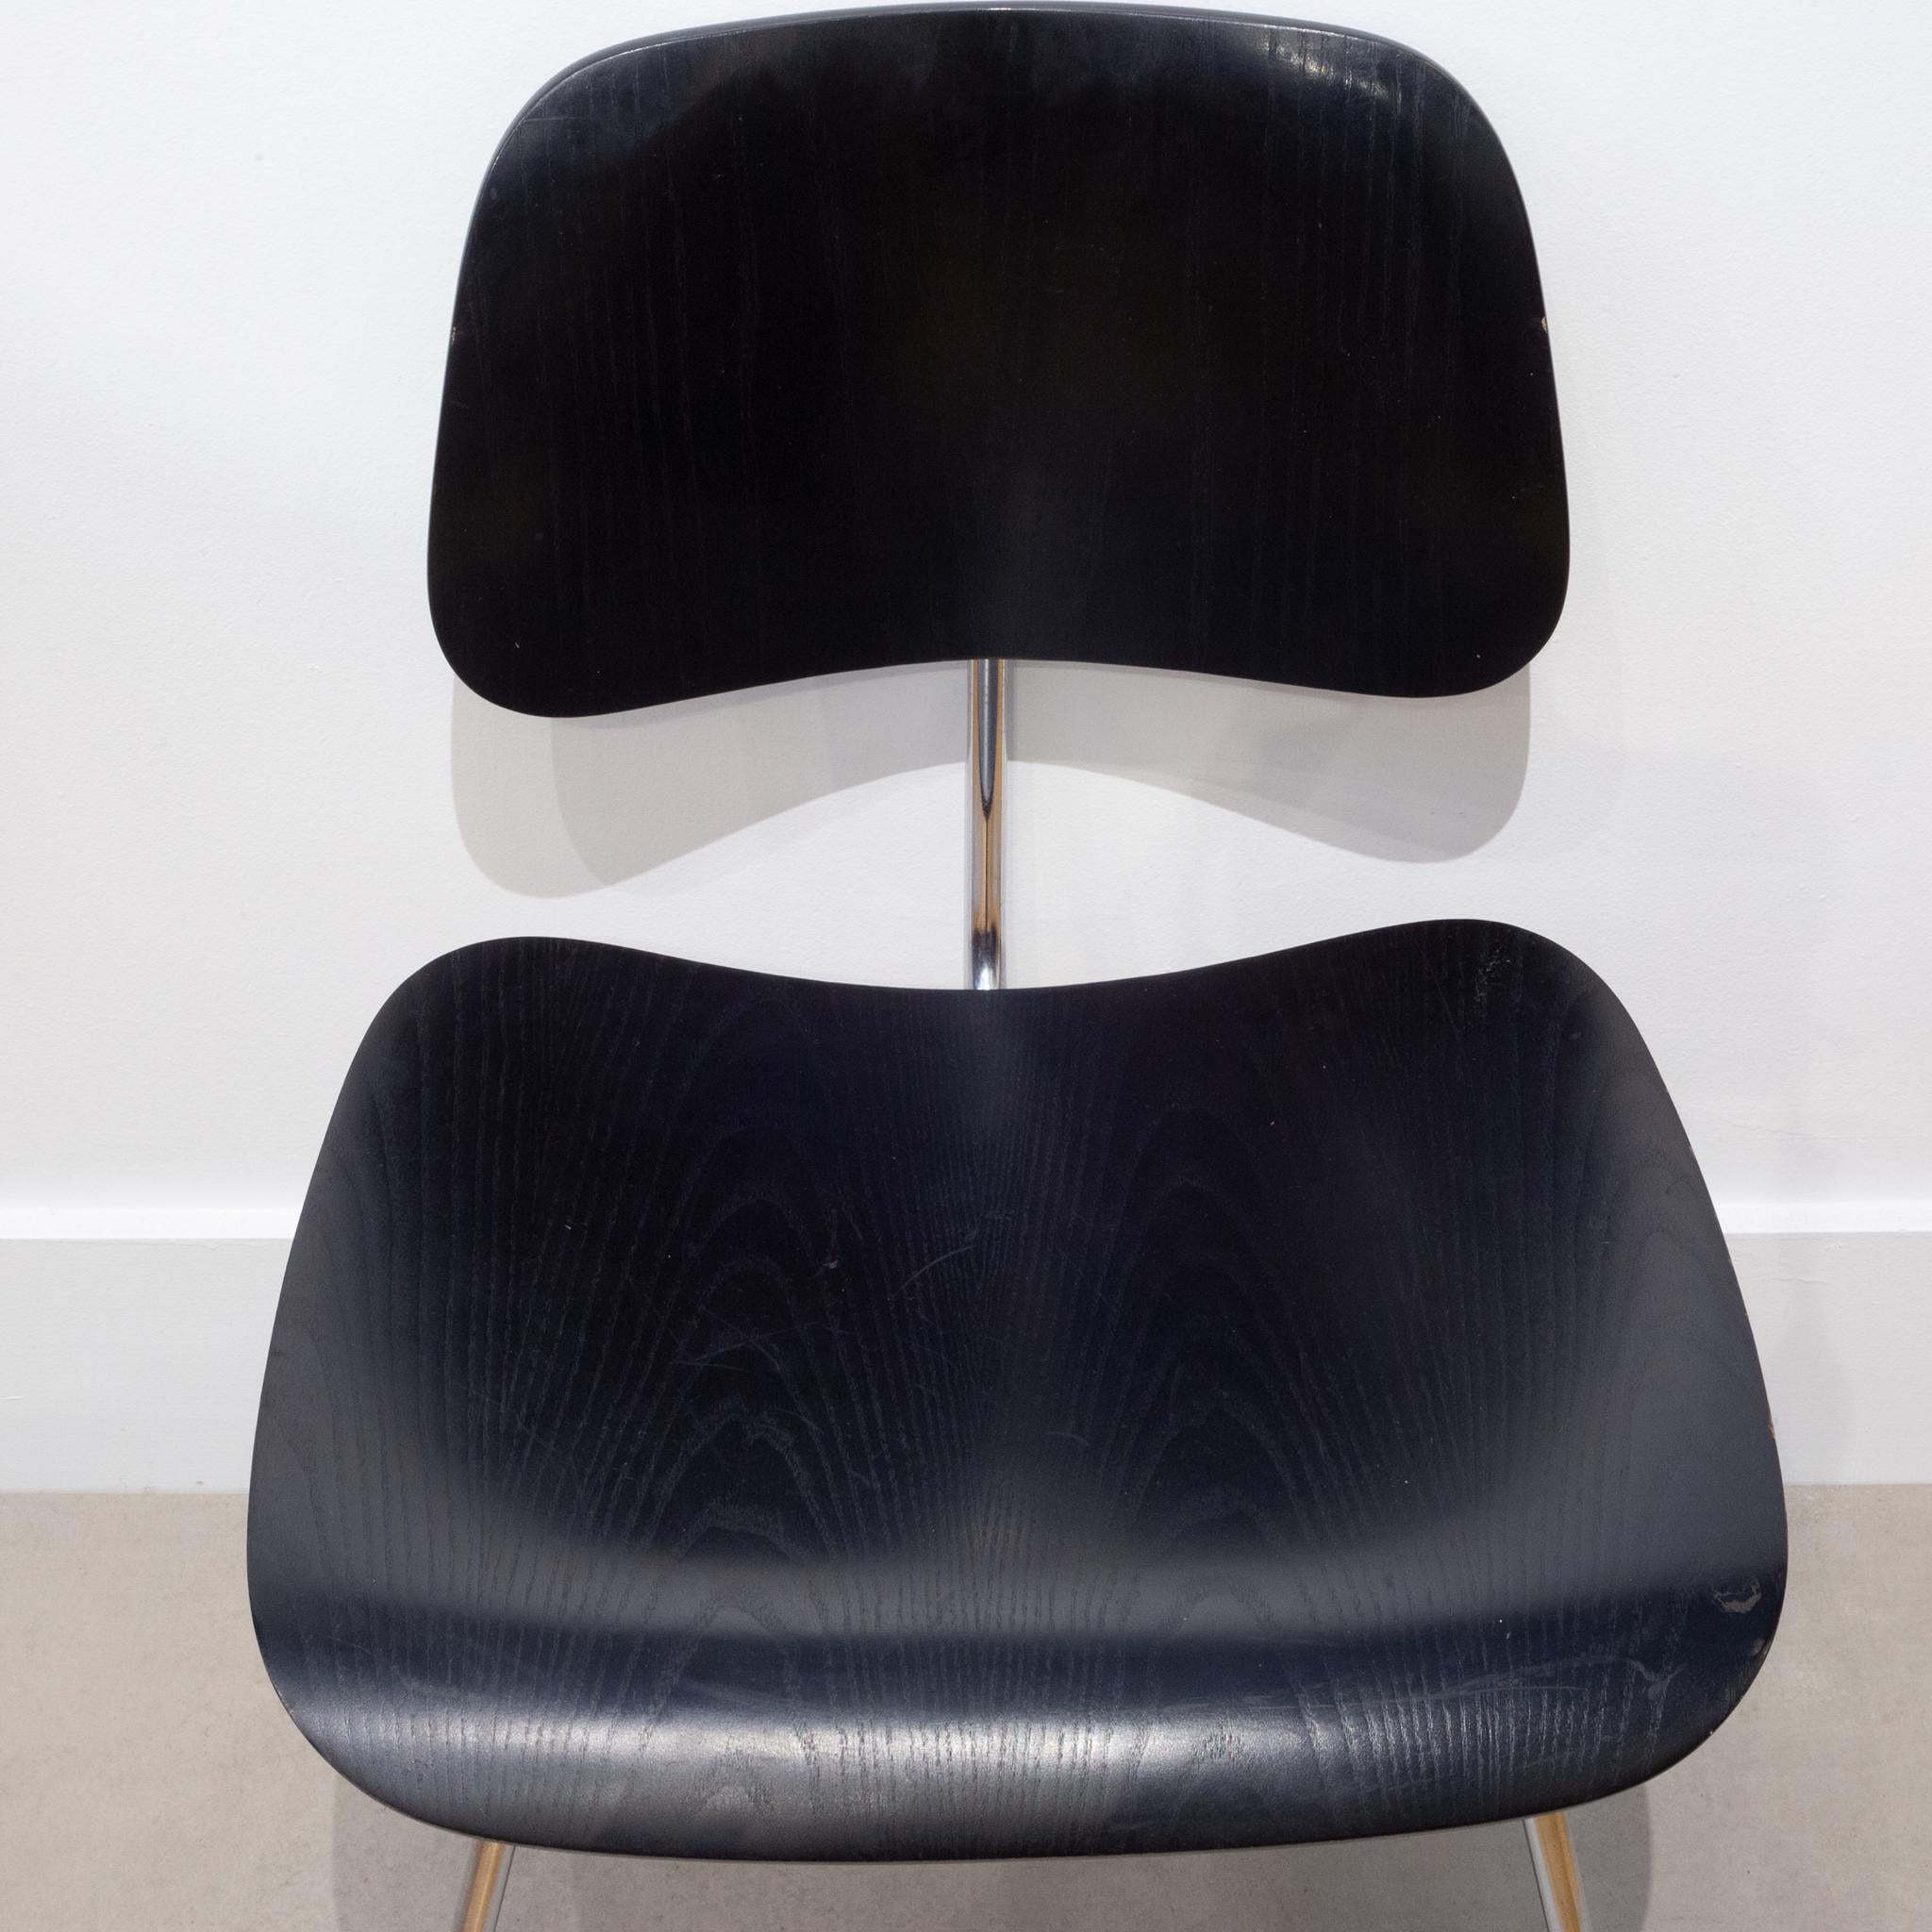 Eames for Herman Miller DCM Chairs in Black-Price is Per Chair 13